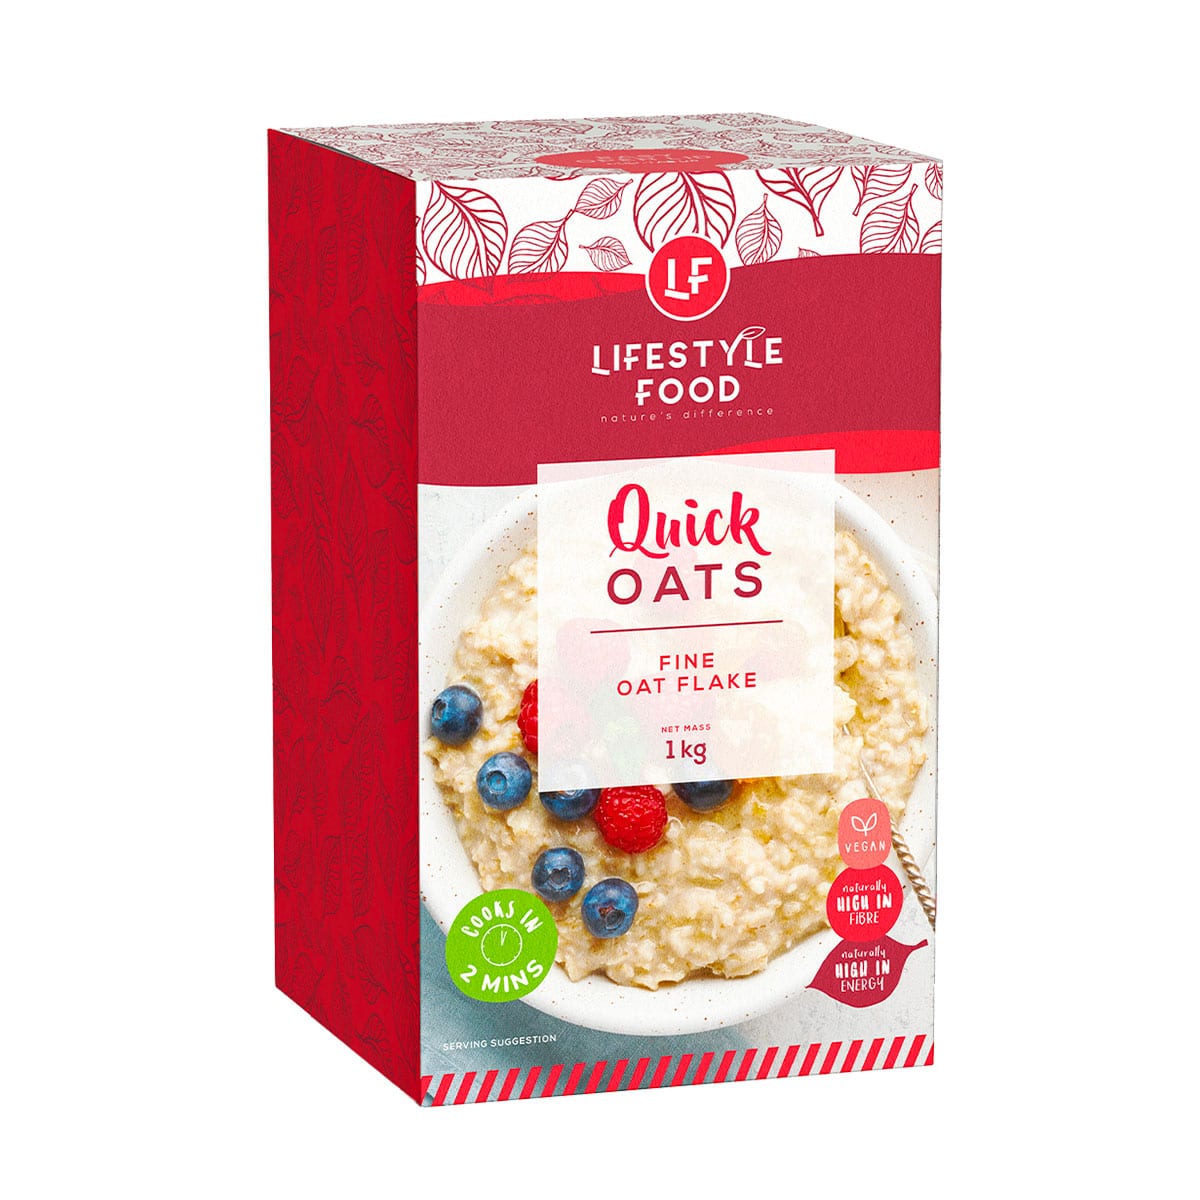 Lifestyle Food Quick Oats Value Pack - 1kg